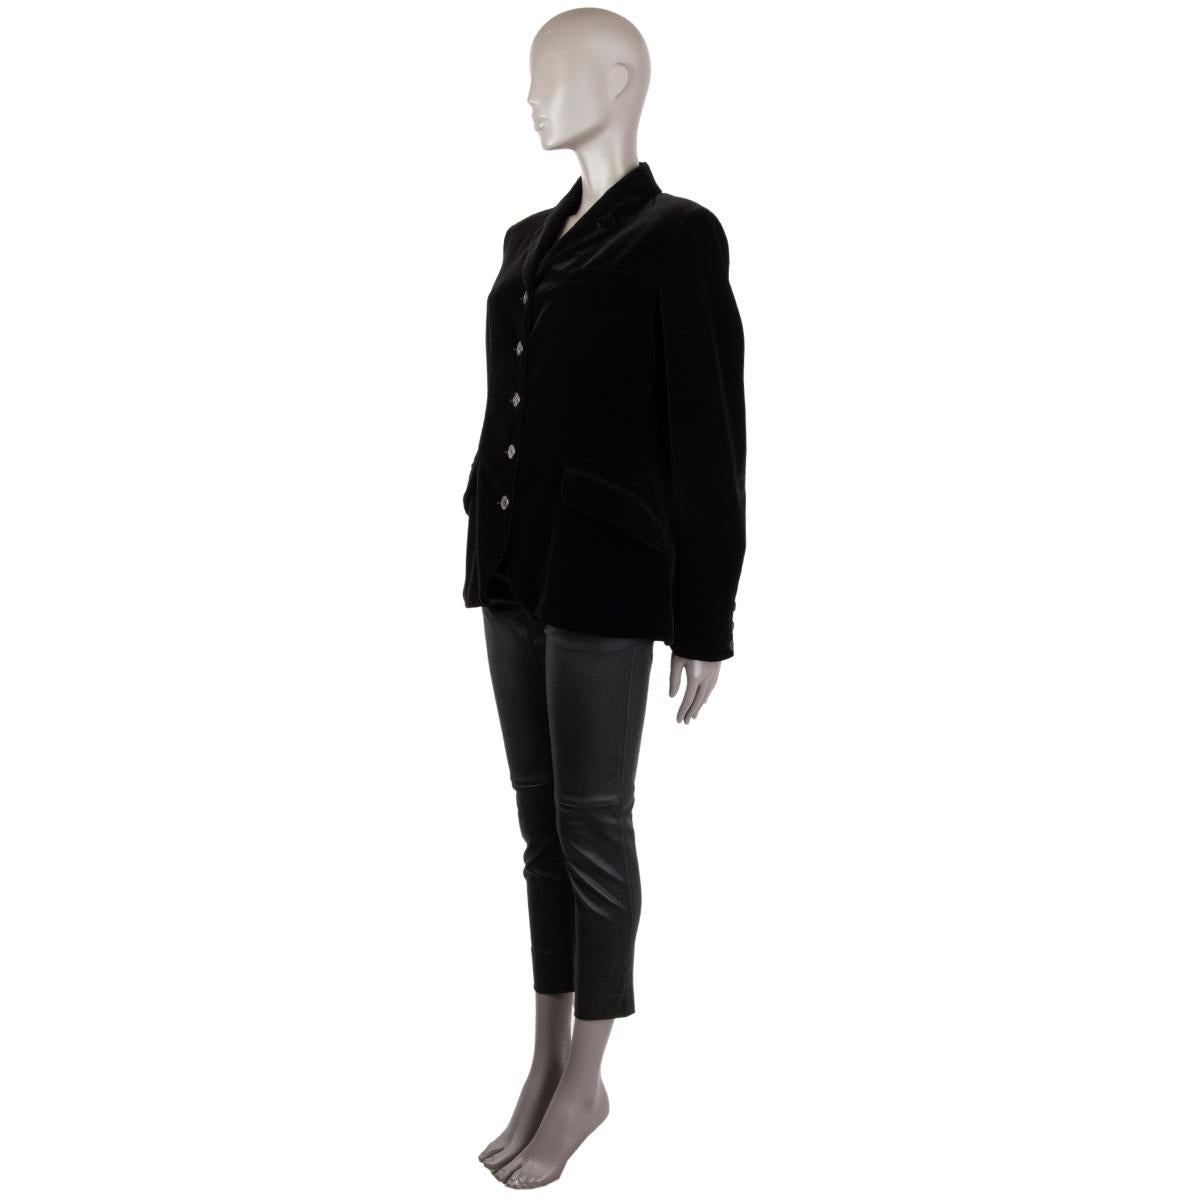 Hermes velvet blazer in black cotton (100%). With collar lining in dark taupe lambskun, notch collar, chest pocket, two flap pockets on the sides, slit on the back, and buttoned sleeves. Closes with urea buttons on the front. Lined in black silk